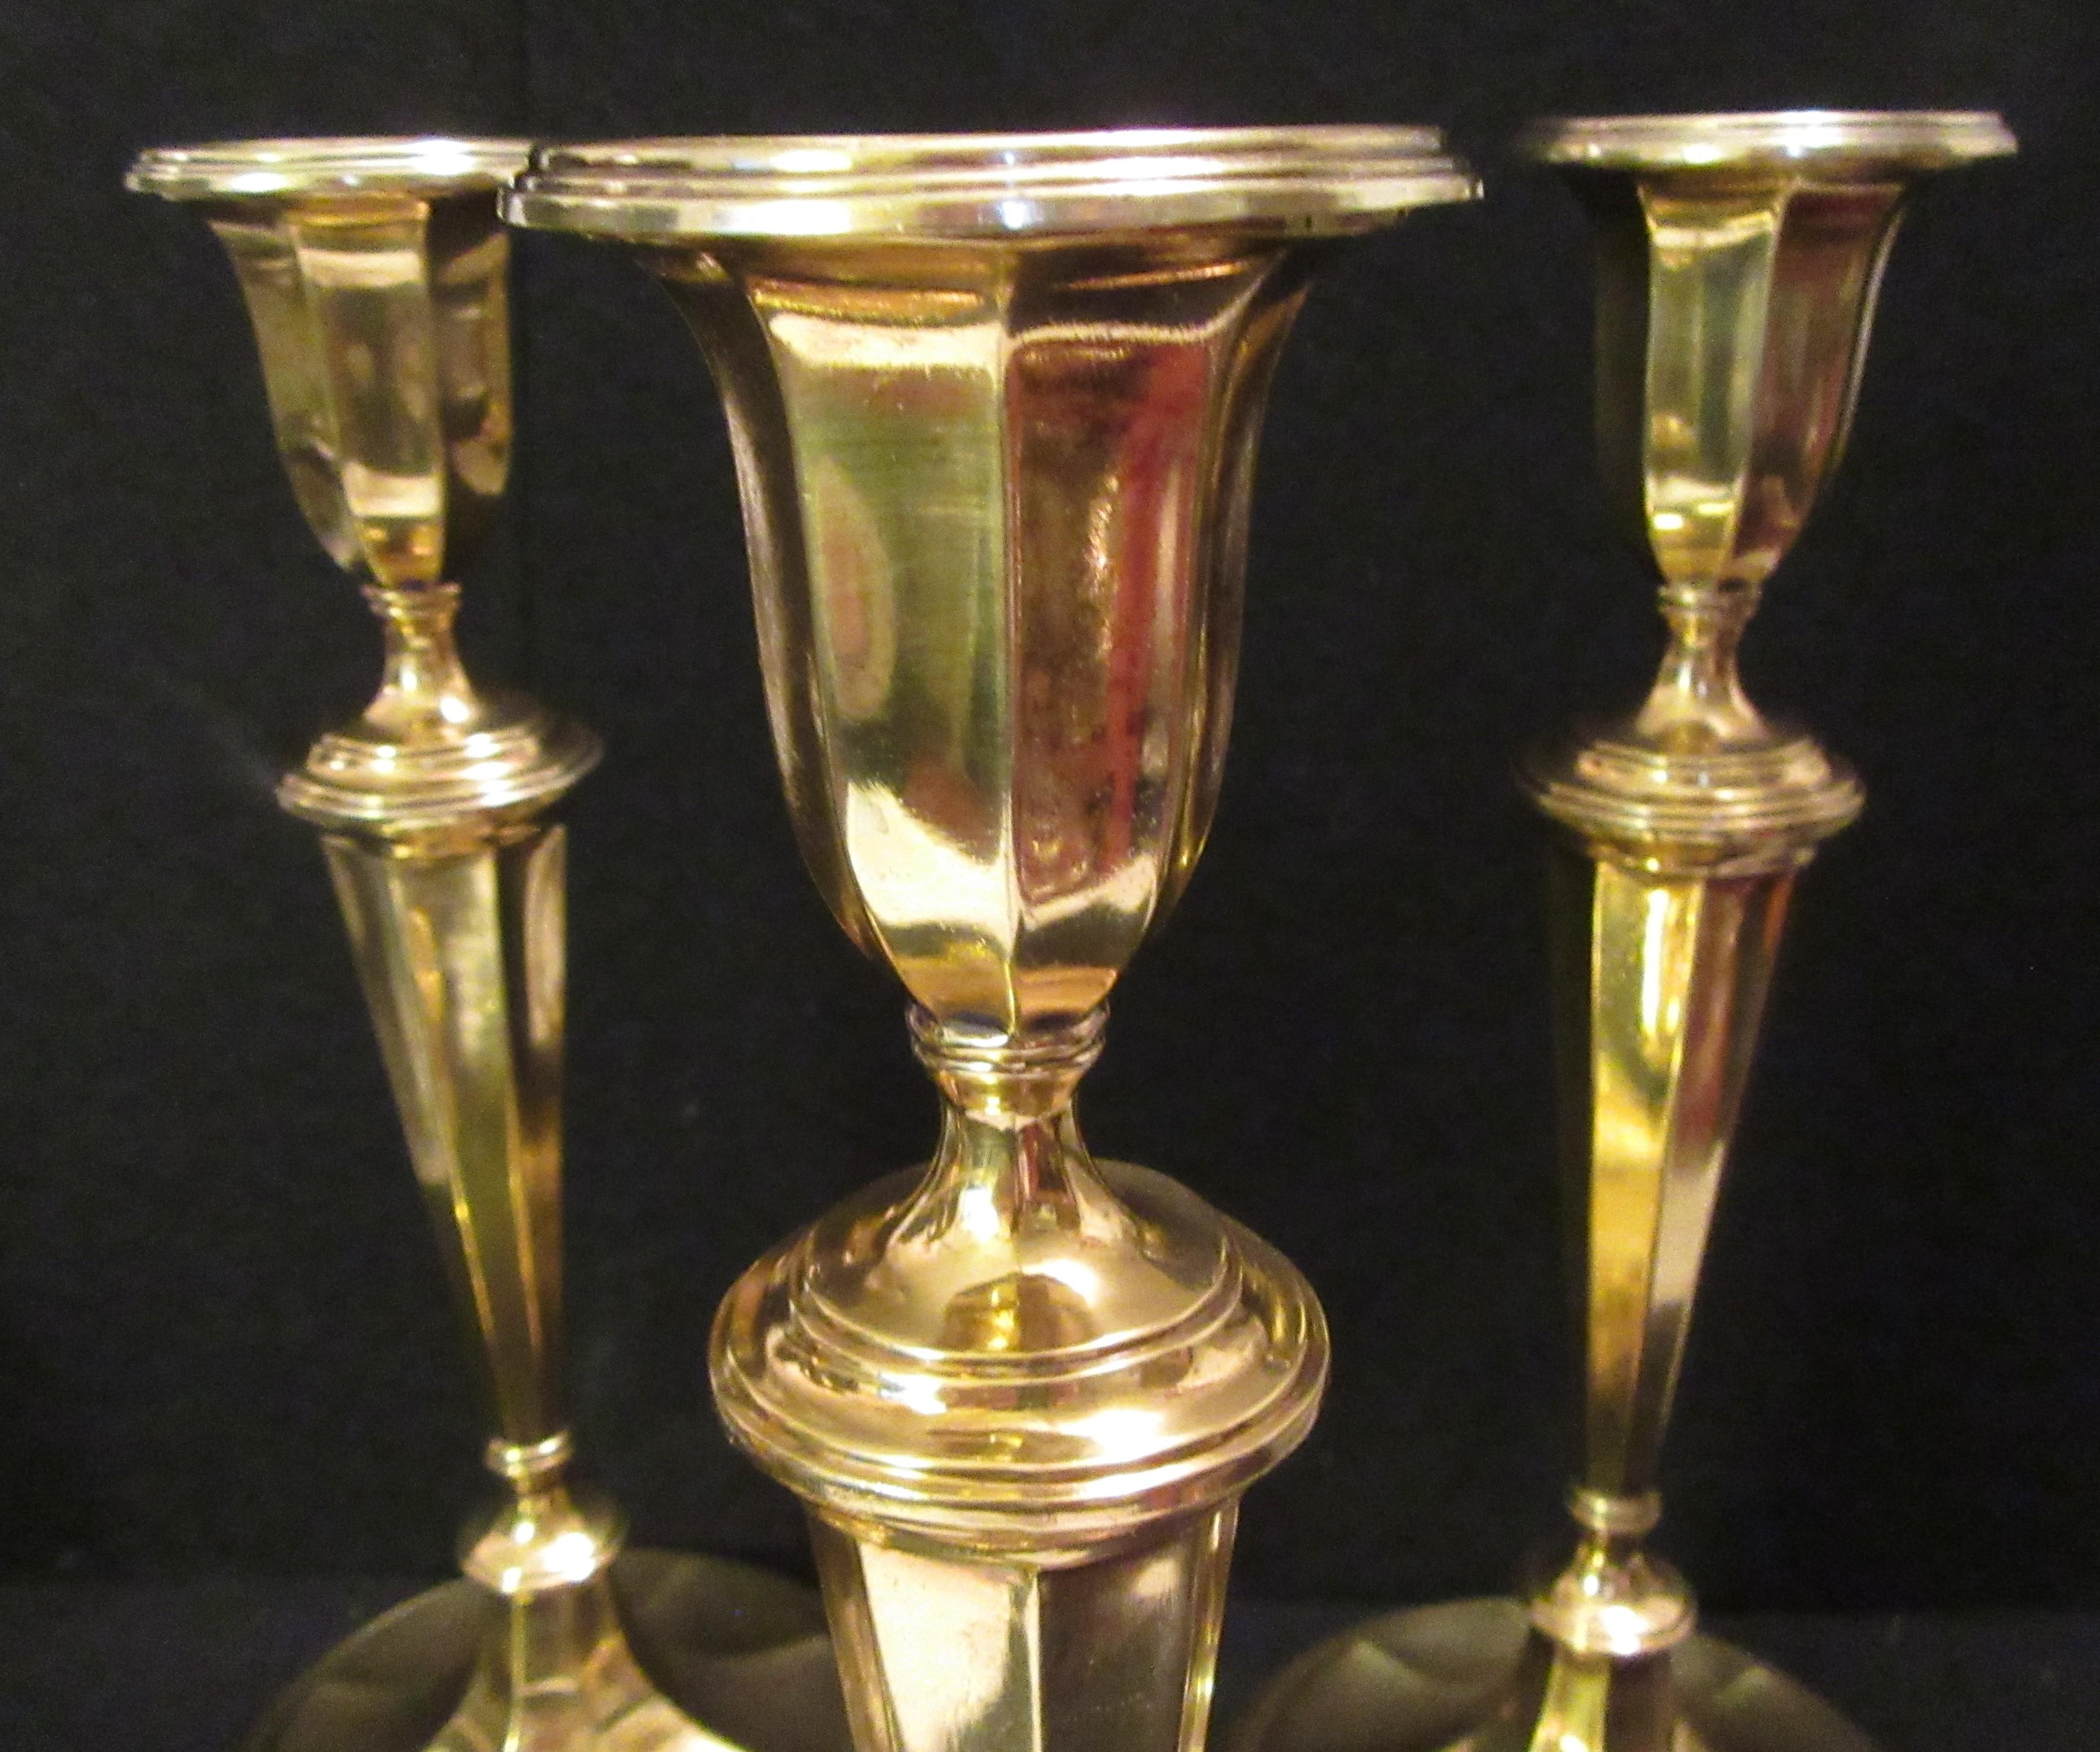 Set of four modern Tiffany & Co. gold-plated sterling silver candlesticks. Excellent condition. Made by T&Co. in England. Urn socket with detachable bobeche, tapering columnar shaft, knops, and stepped foot. Spare form embellished with reeding. The